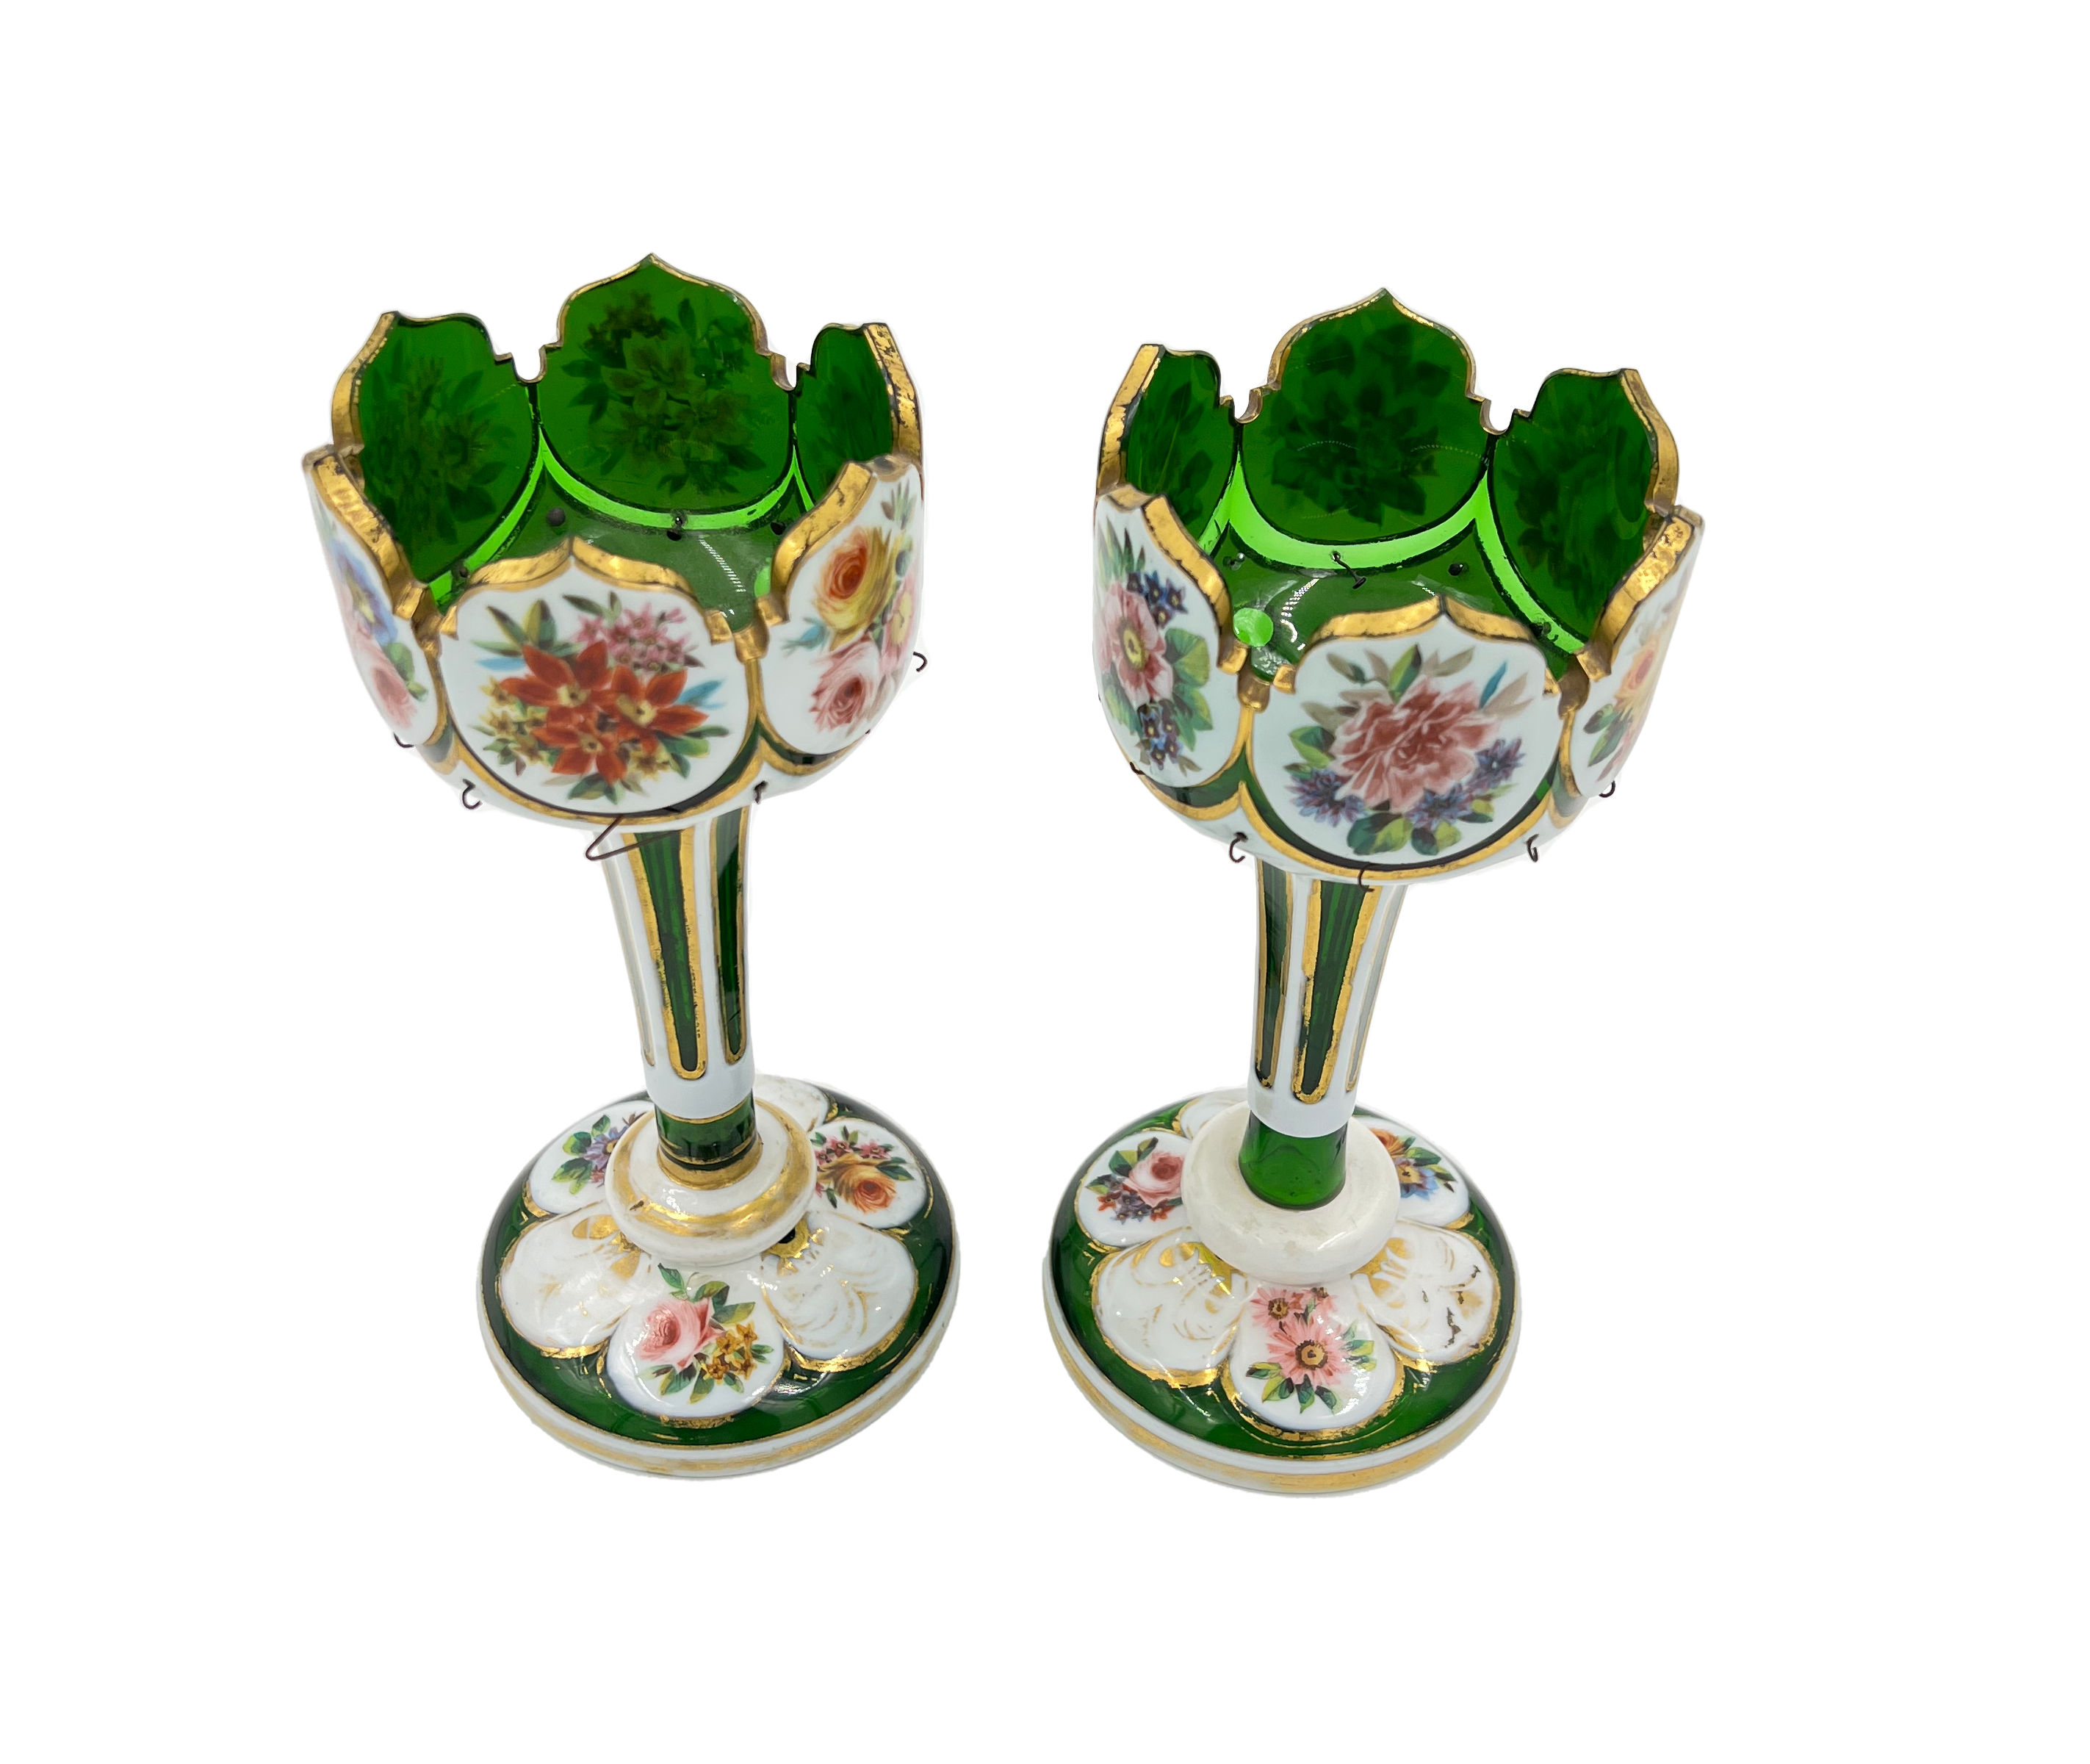 PAIR OF HAND-PAINTED BOHEMIAN GLASS LUSTRES - Image 2 of 2